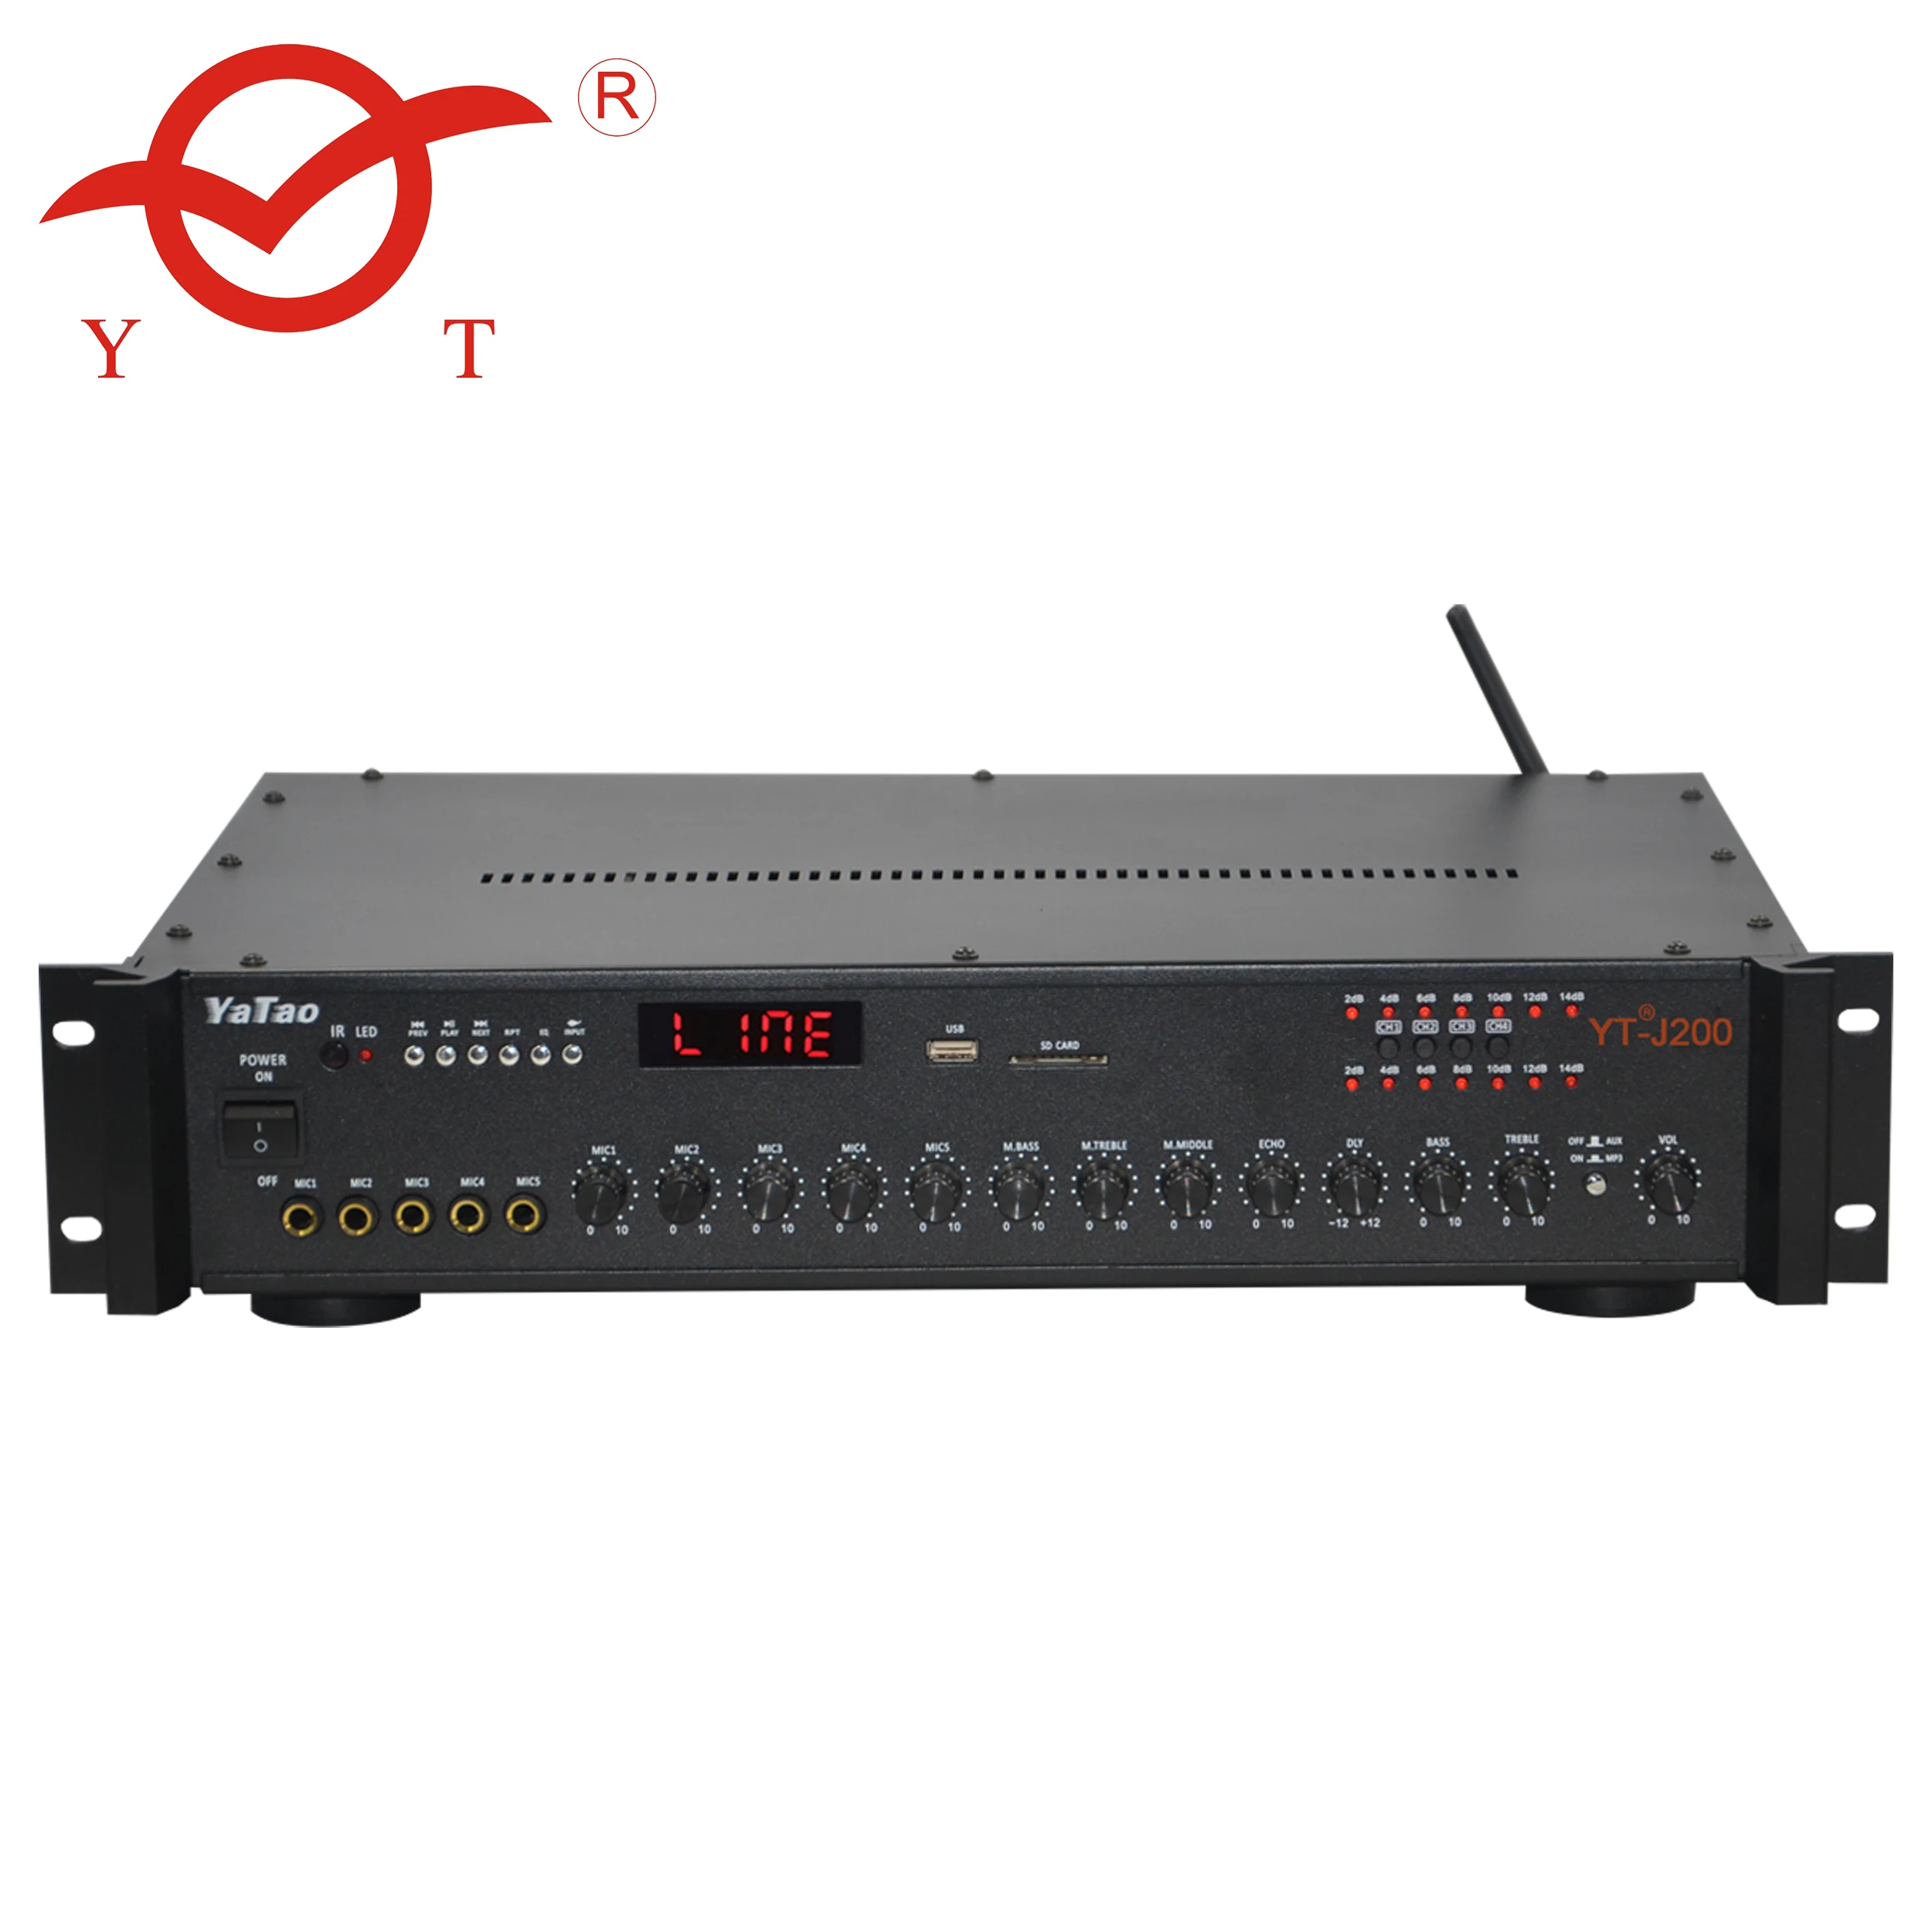 

Professional power Public address system amplifier Mono 200 watts with 4 adjustable zones PA amplifier